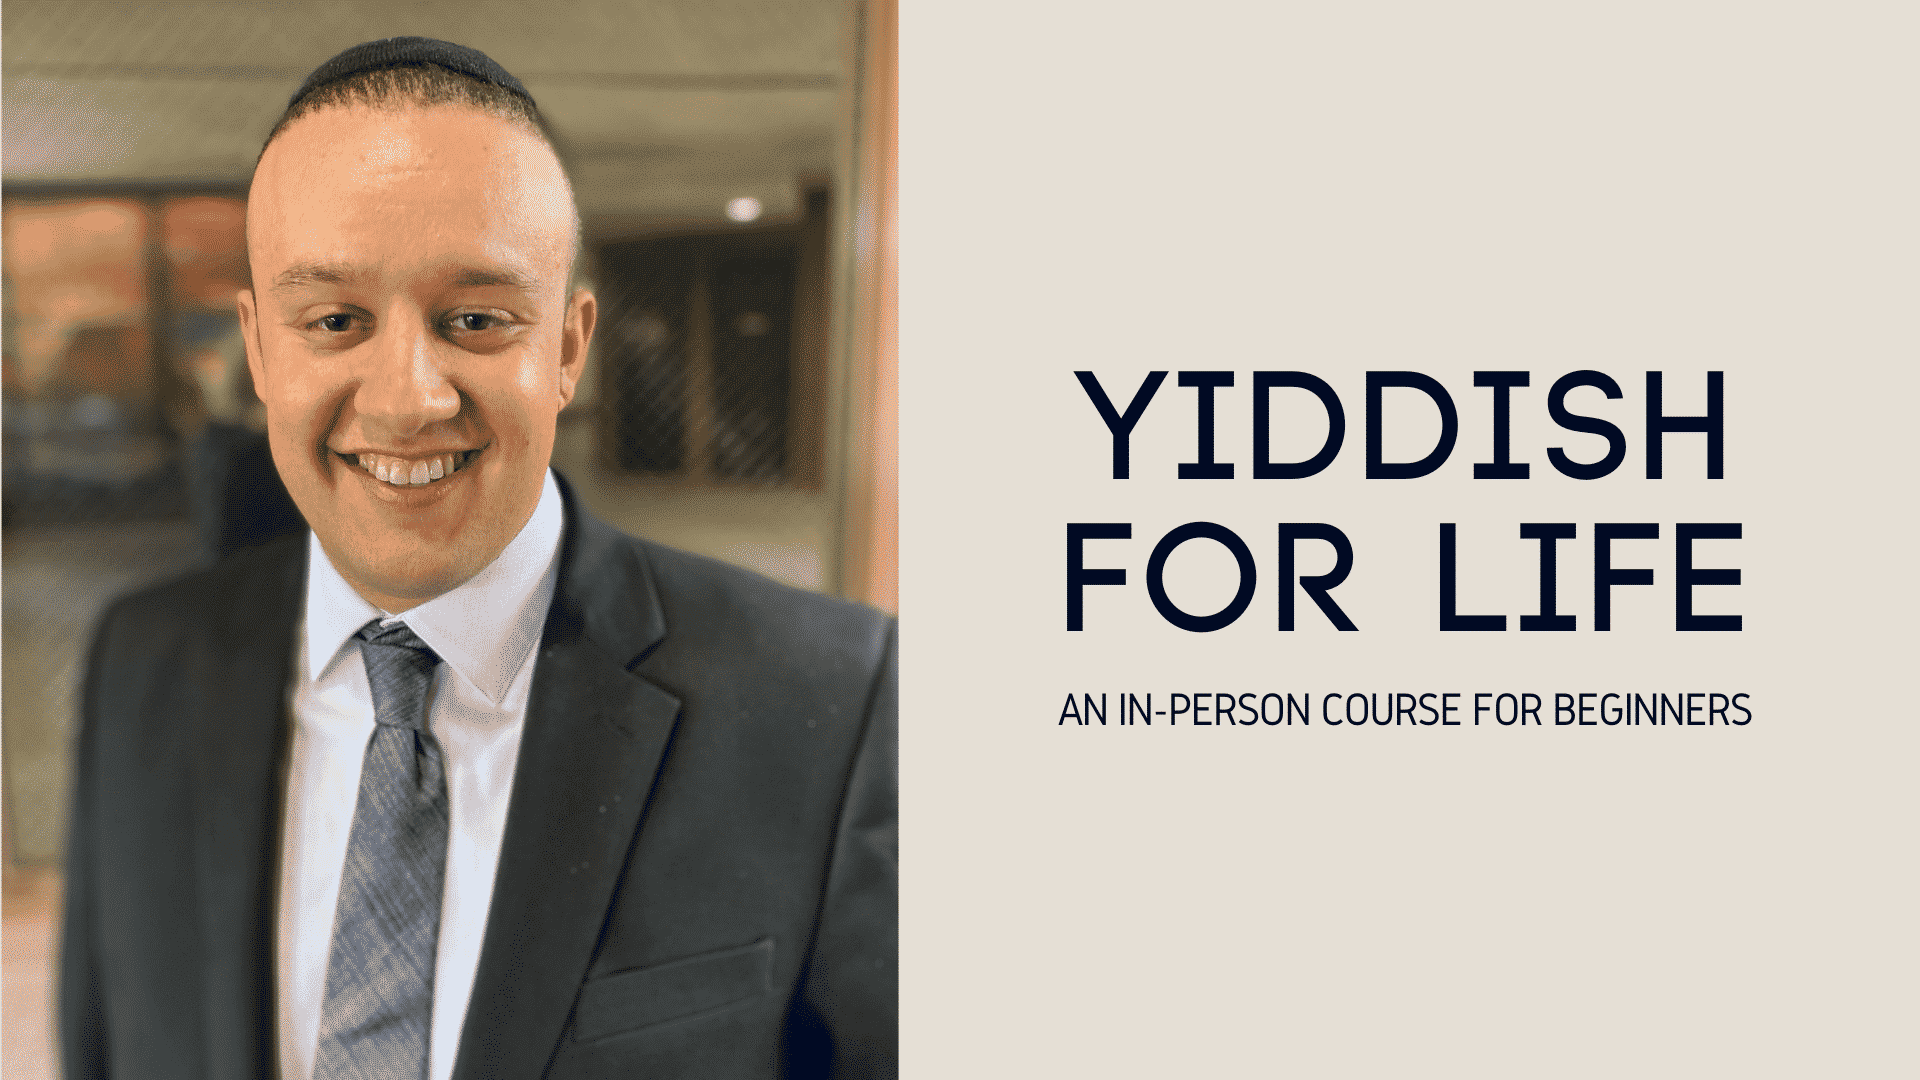 Yiddish for Life: An In-Person Course for Beginners